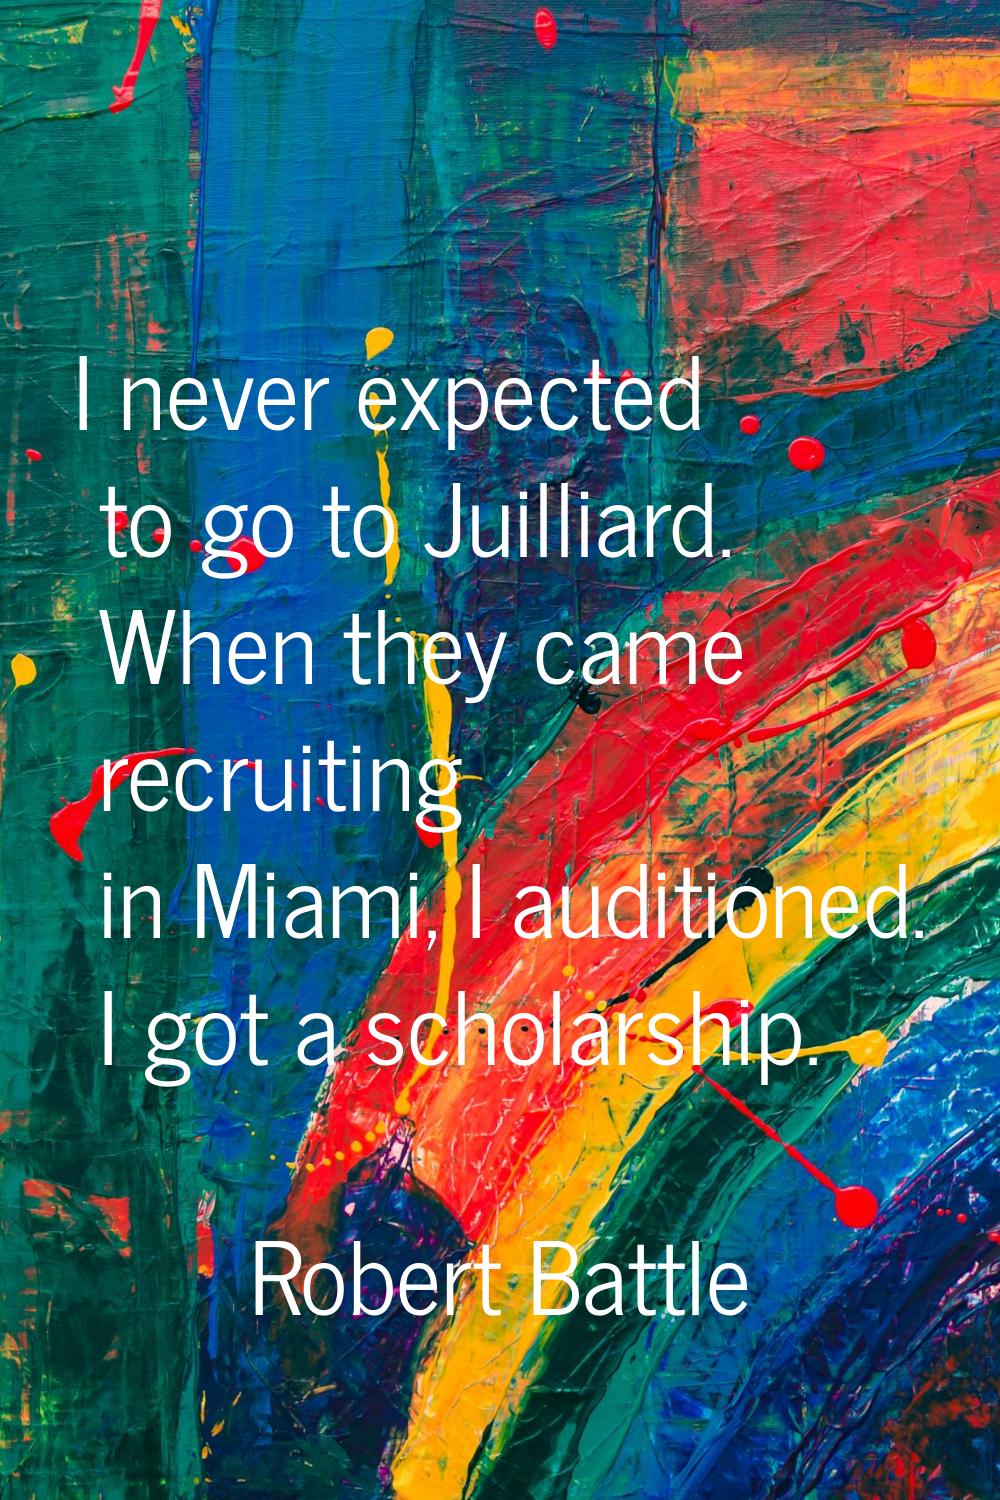 I never expected to go to Juilliard. When they came recruiting in Miami, I auditioned. I got a scho